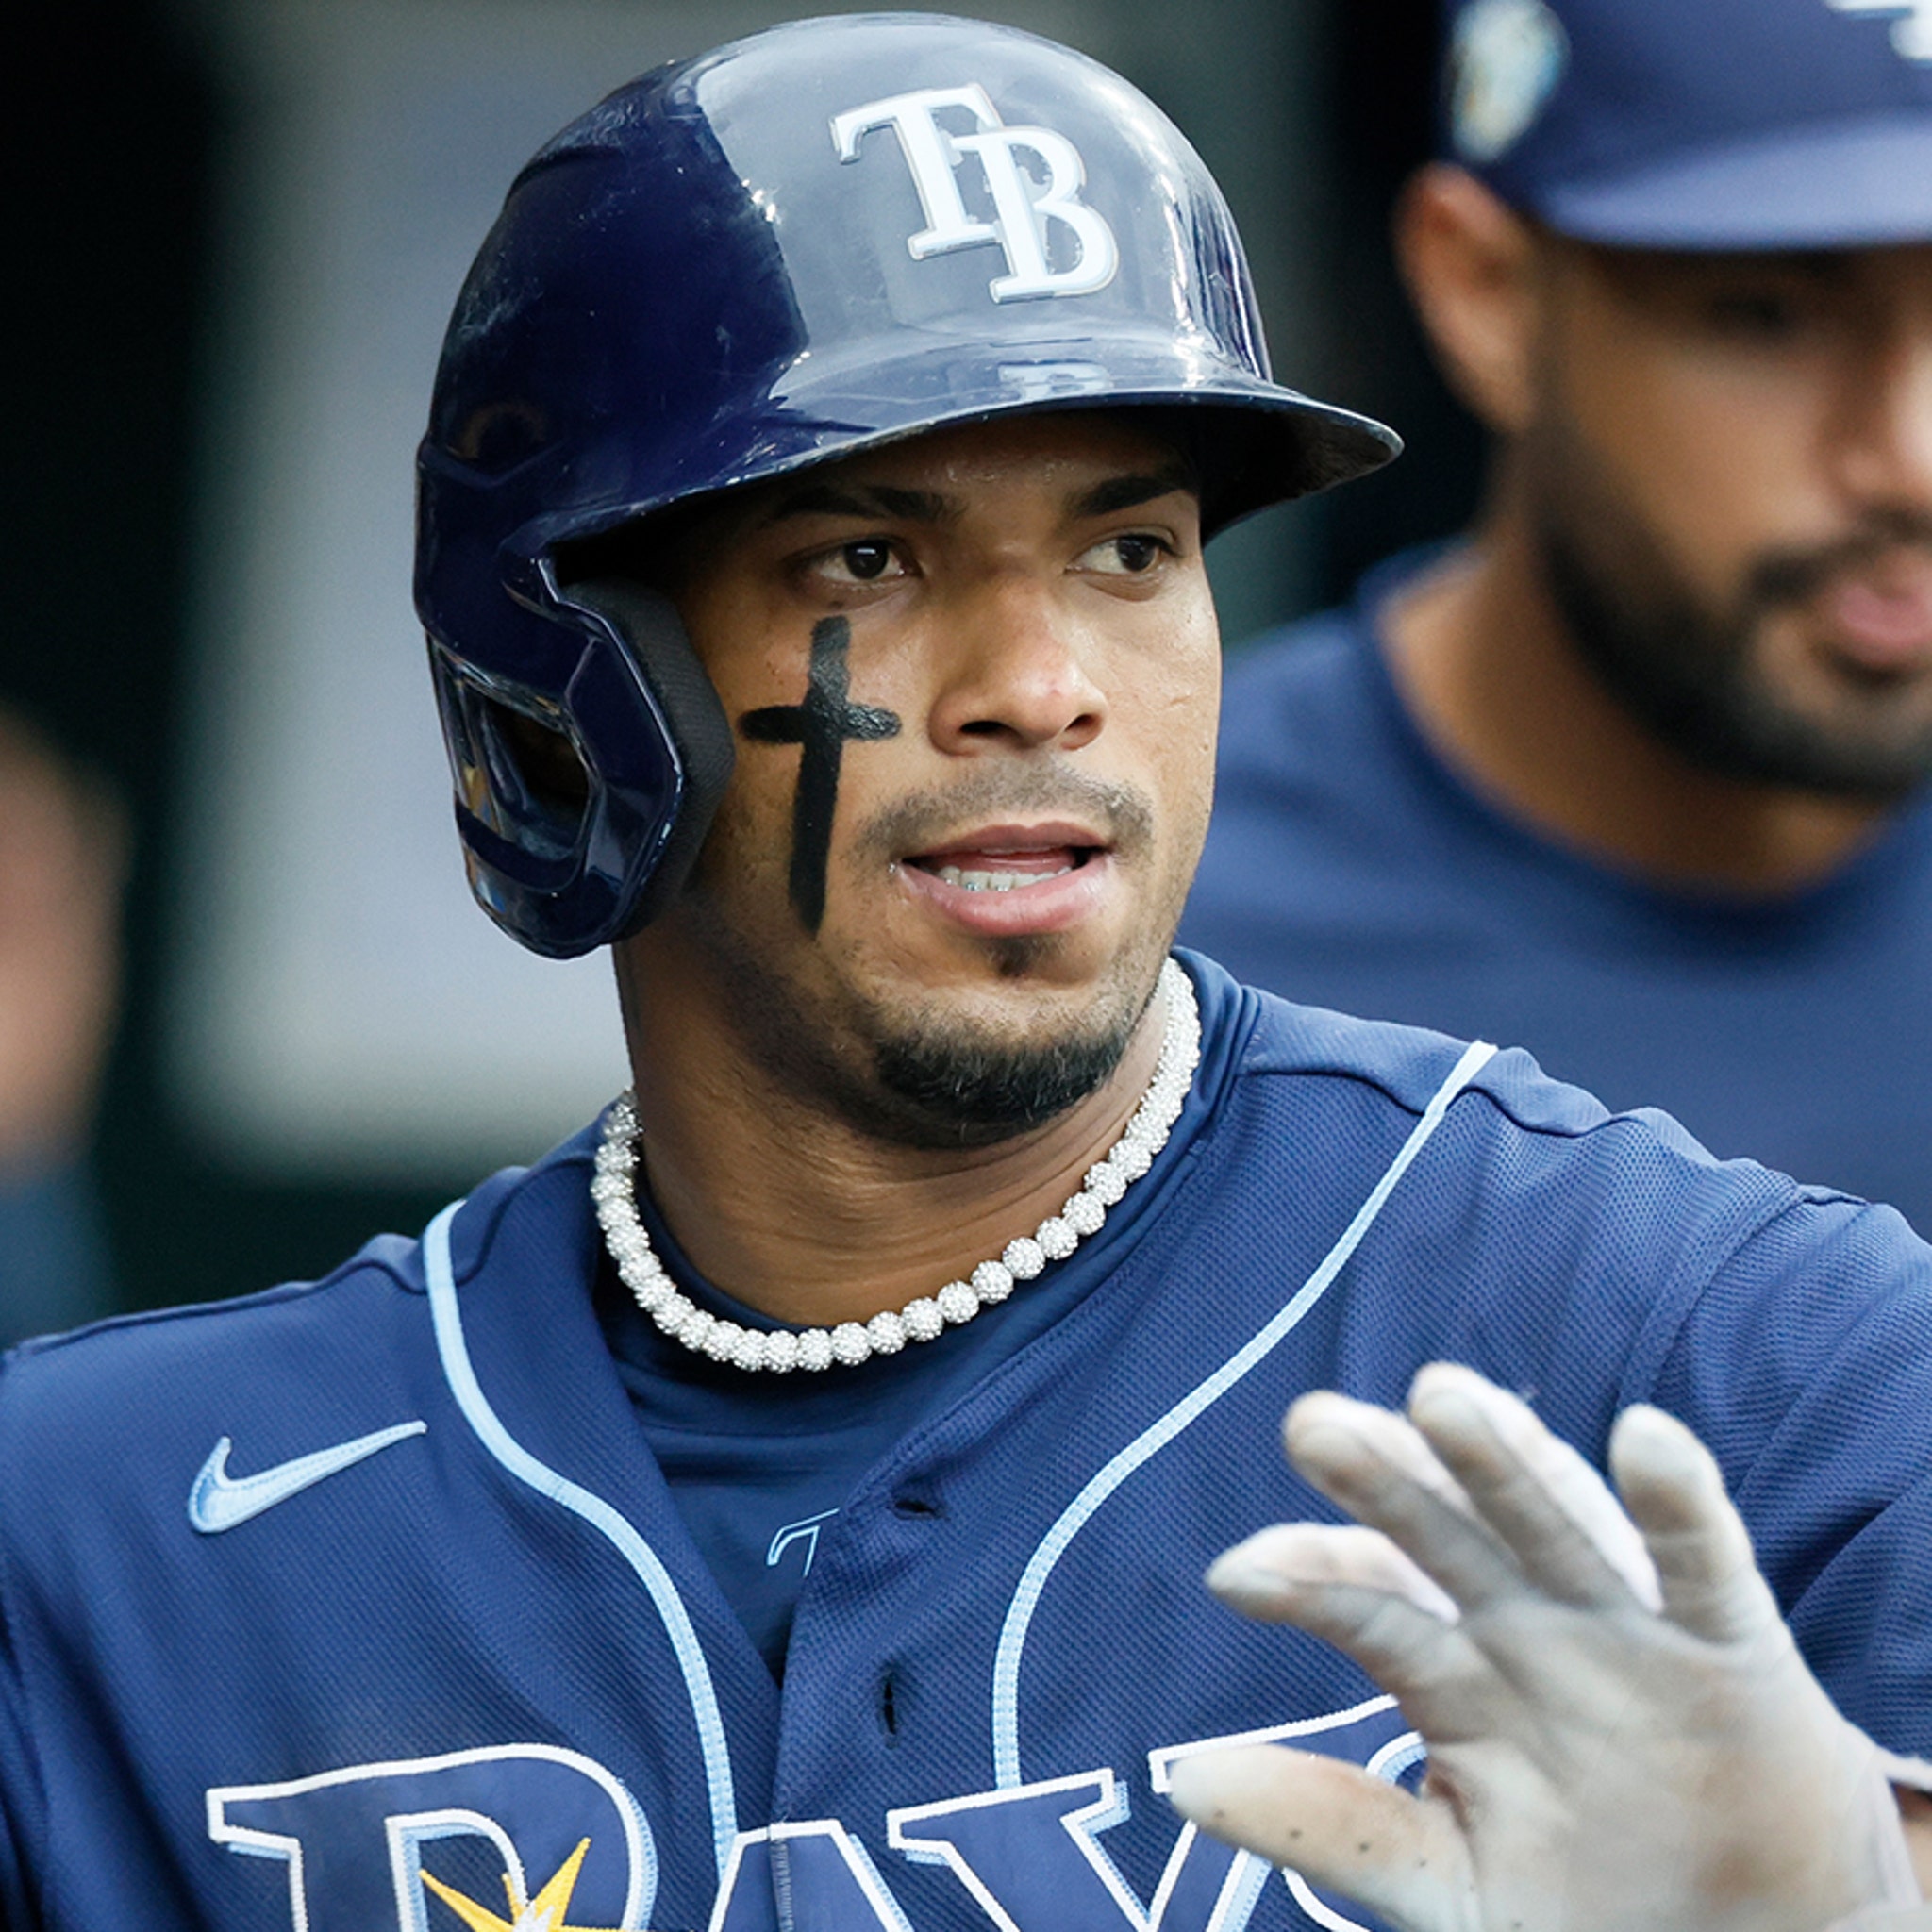 Who is Wander Franco's wife? MLB launches probe into allegations of  inappropriate relationship involving Tampa Bay Rays shortstop